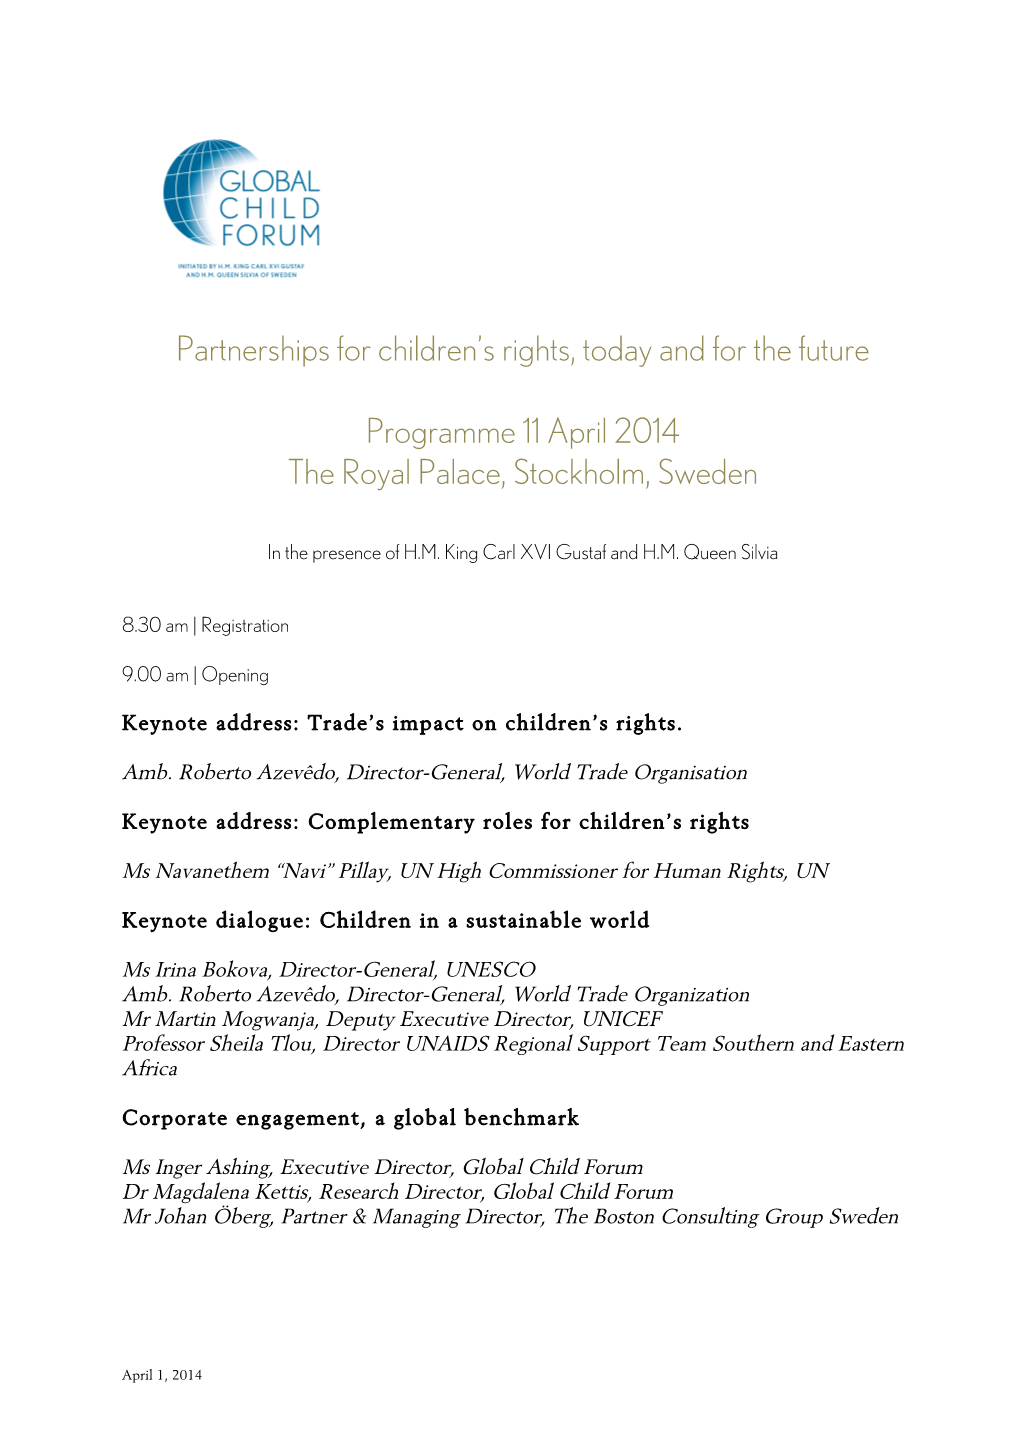 Partnerships for Children's Rights, Today and for the Future Programme